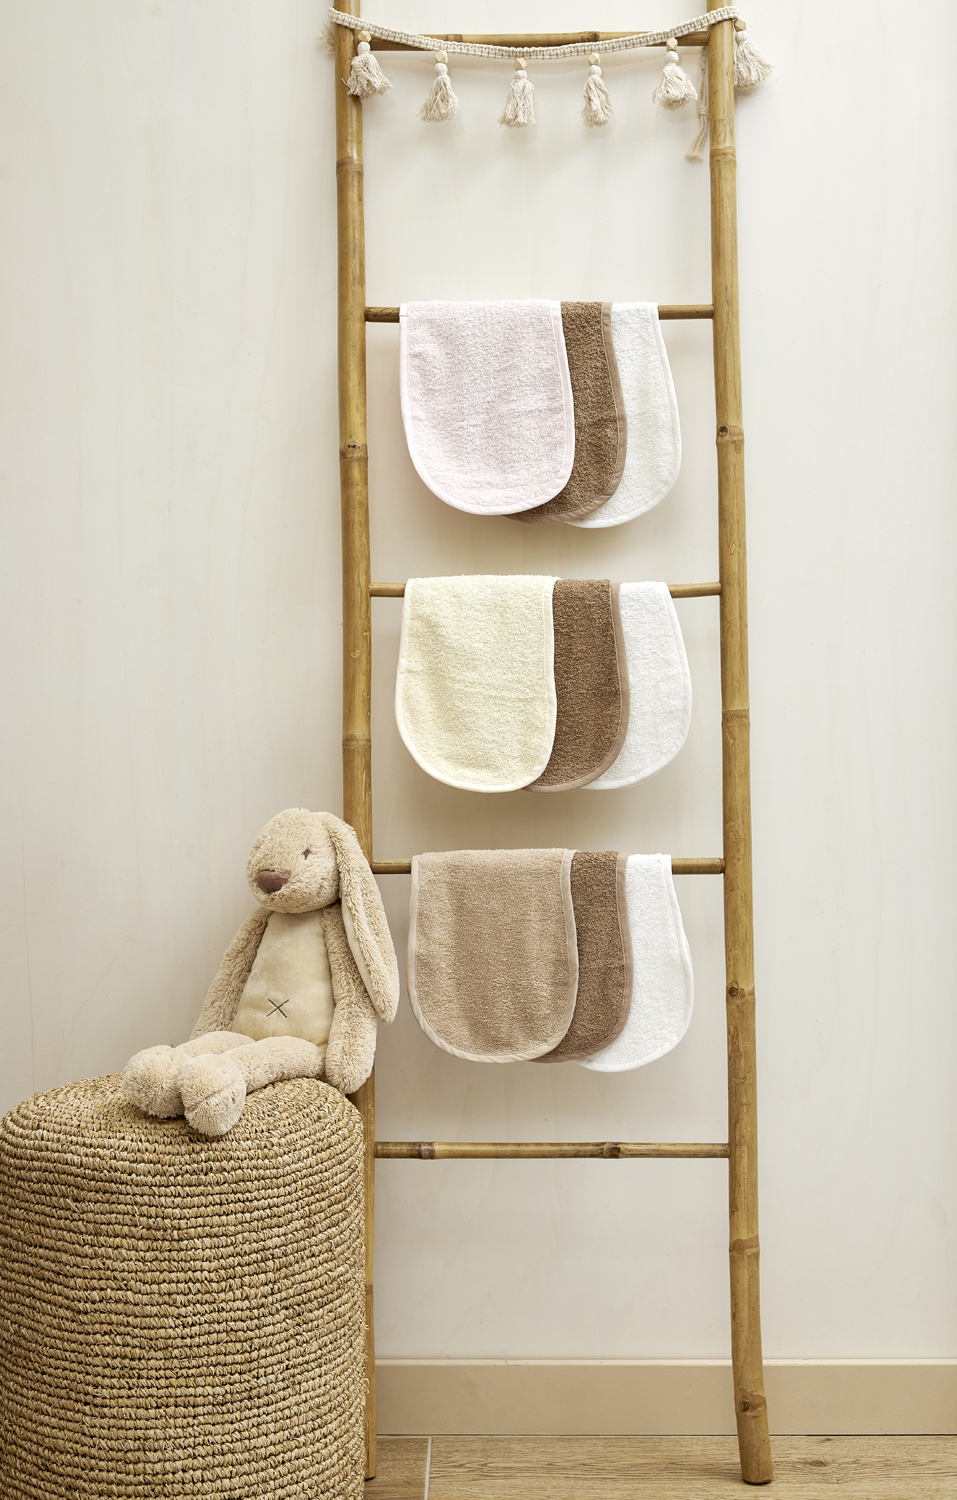 Burb cloth 3-pack terry Uni - offwhite/soft pink/toffee - 53x20cm